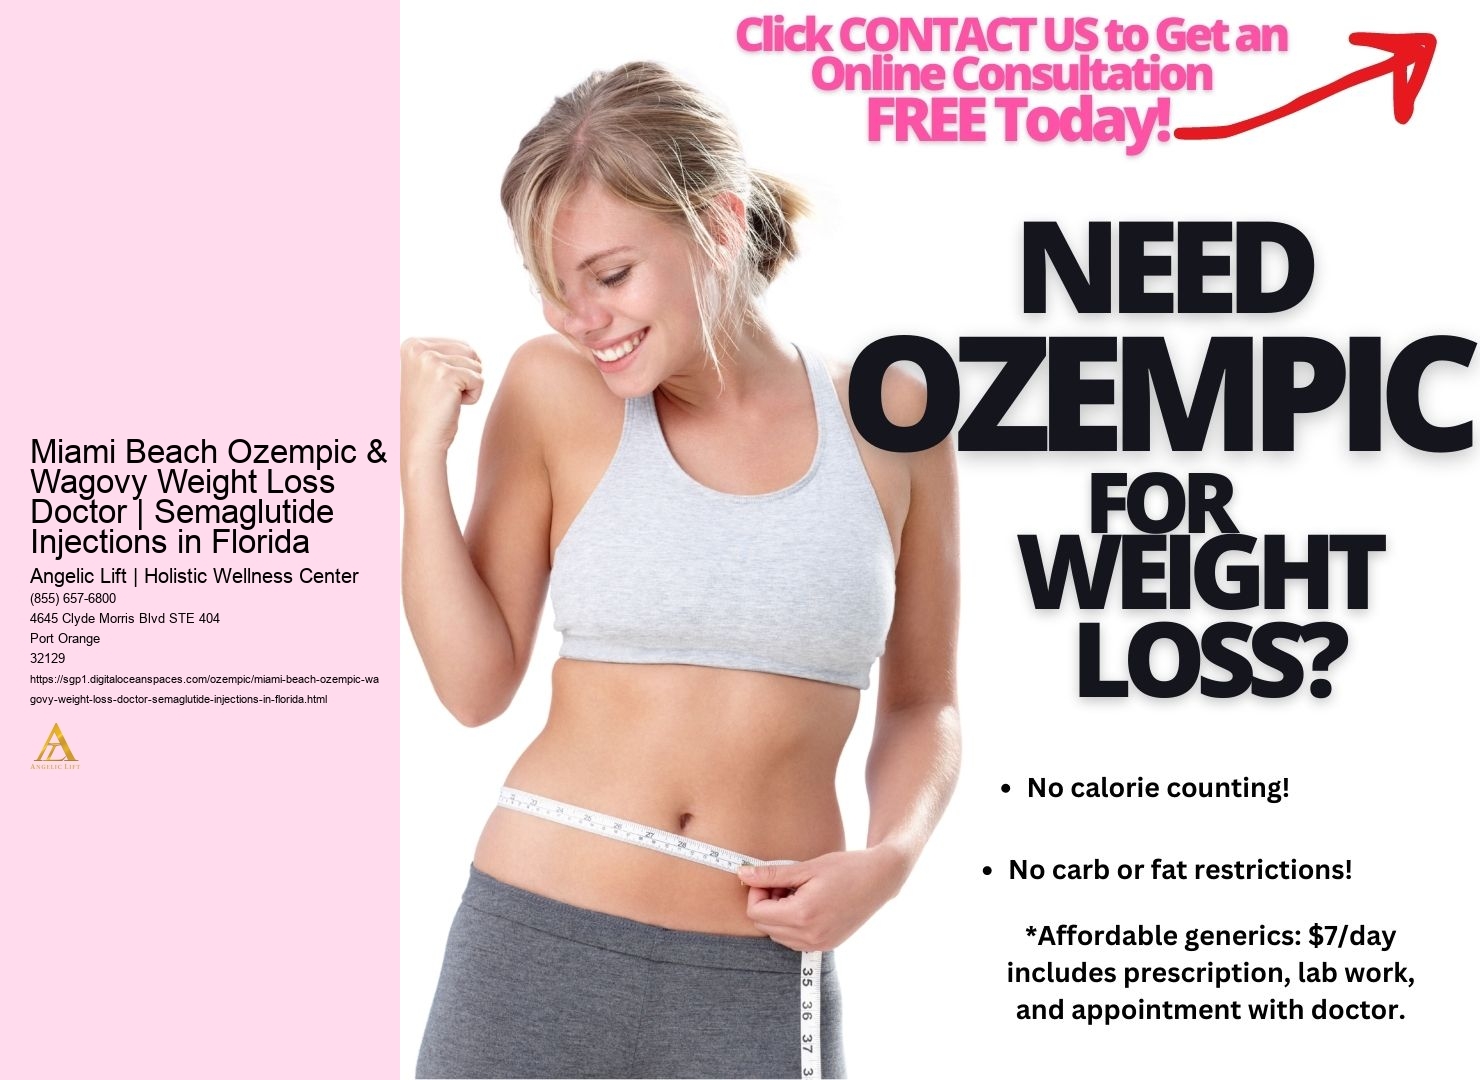 Miami Beach Ozempic & Wagovy Weight Loss Doctor | Semaglutide Injections in Florida